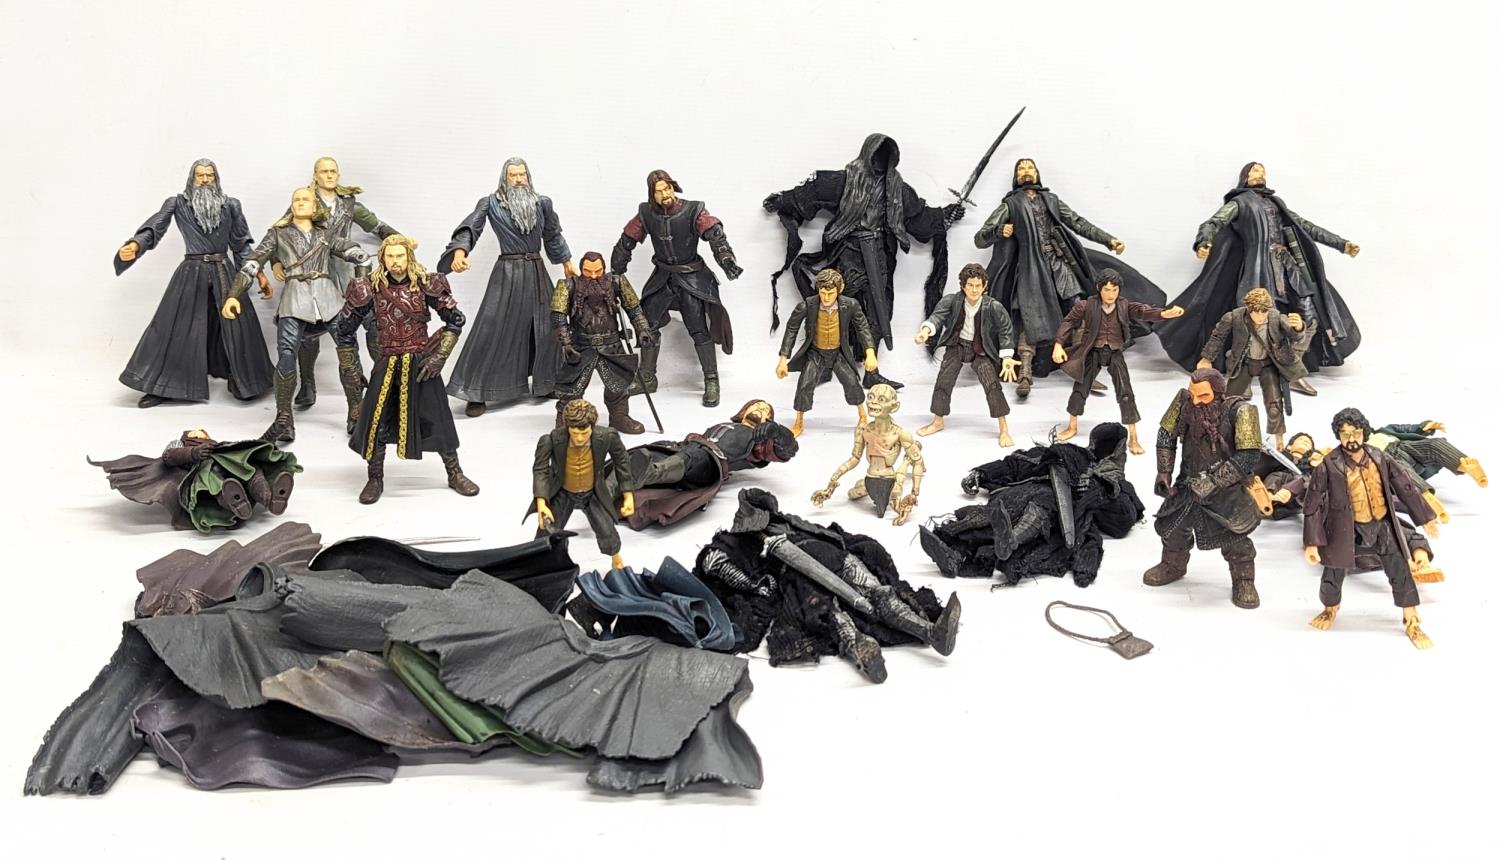 A collection of The Lord of The Rings toy figures by Marvel, including Aragorn, Gandalf, Boromir, - Image 2 of 4